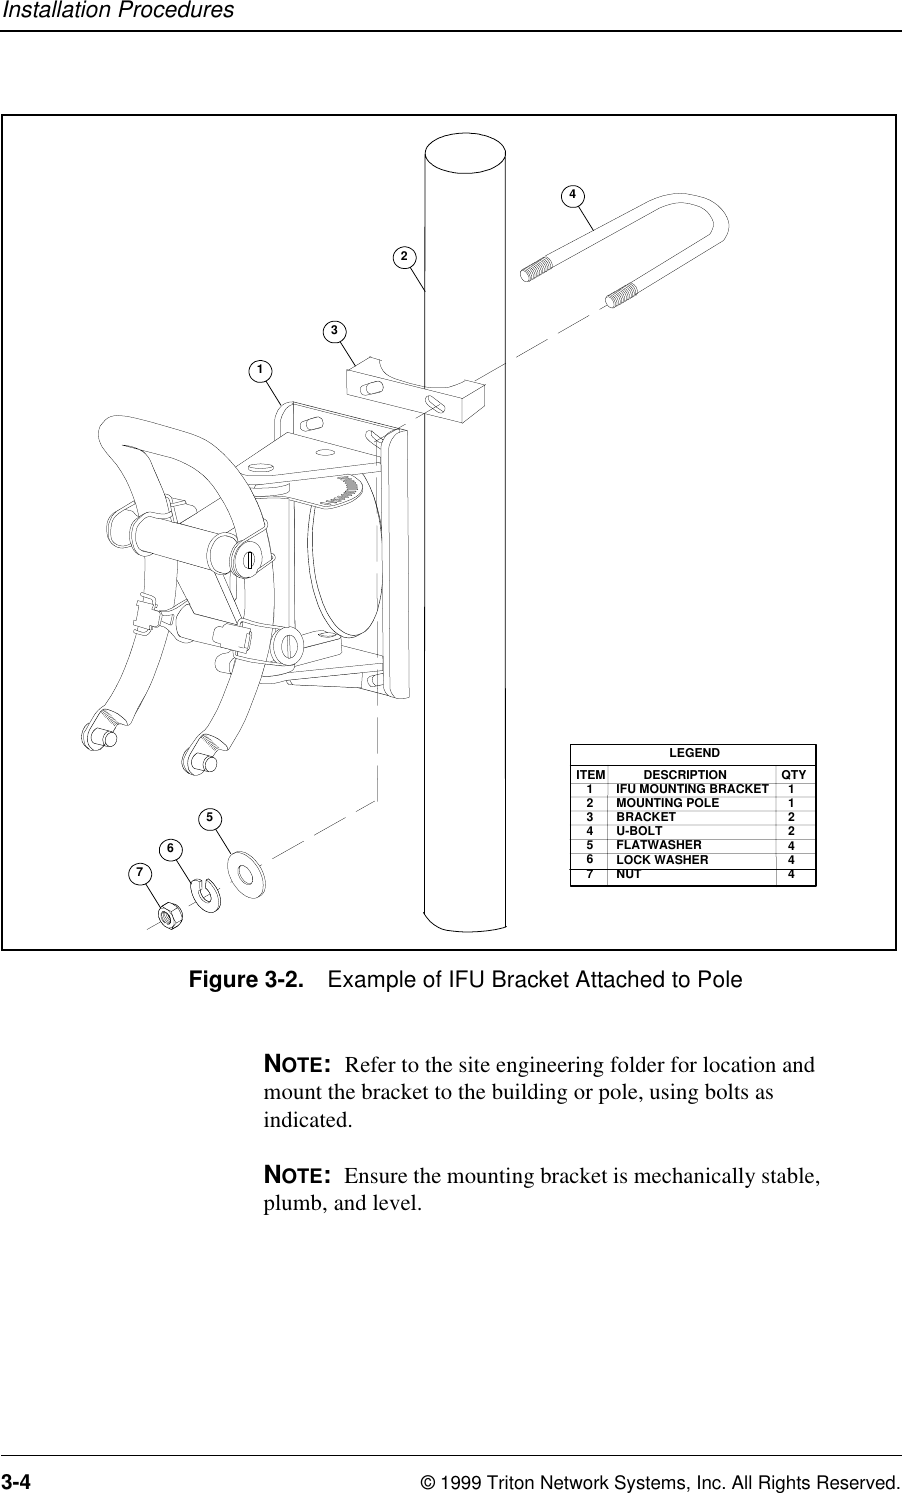 Installation Procedures3-4 © 1999 Triton Network Systems, Inc. All Rights Reserved.Figure 3-2. Example of IFU Bracket Attached to PoleNOTE:  Refer to the site engineering folder for location and mount the bracket to the building or pole, using bolts as indicated. NOTE:  Ensure the mounting bracket is mechanically stable, plumb, and level.LEGENDITEM   1   2   3   4   5   6   7        DESCRIPTIONIFU MOUNTING BRACKETMOUNTING POLEBRACKETU-BOLTFLATWASHERLOCK WASHERNUTQTY  1  1  2  2  4  4  45671342